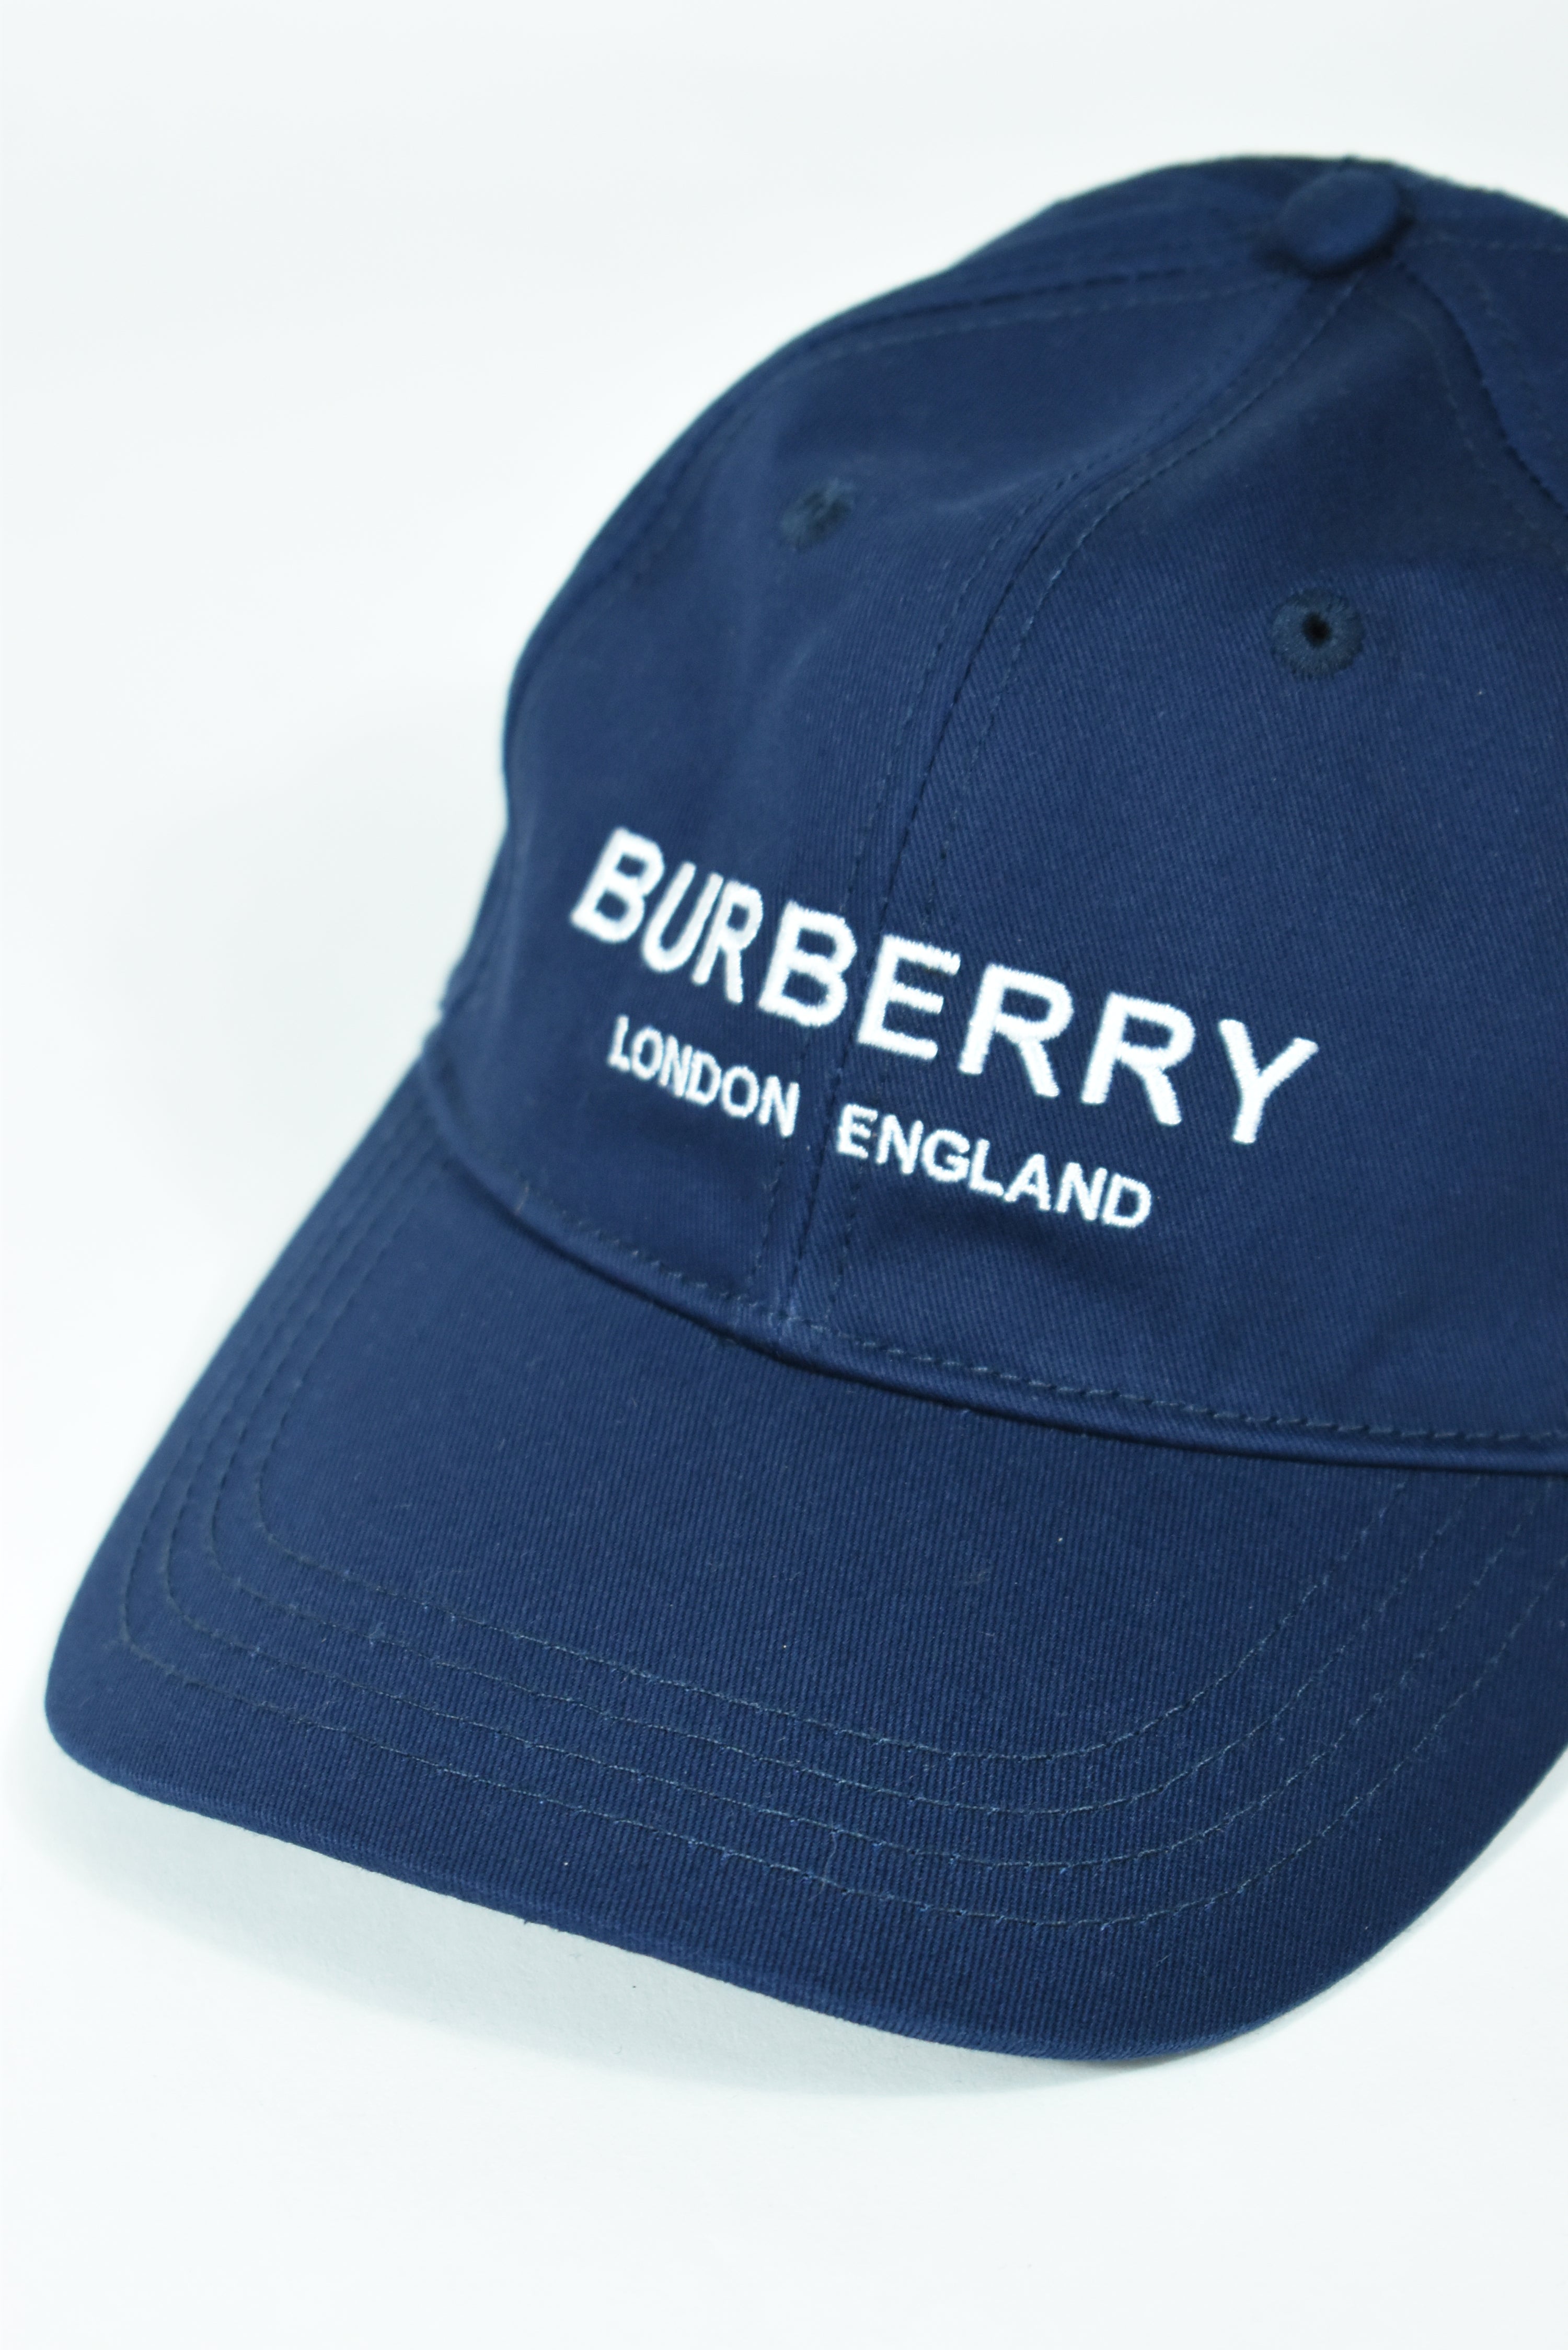 New Navy Burberry London Embroidery Cap